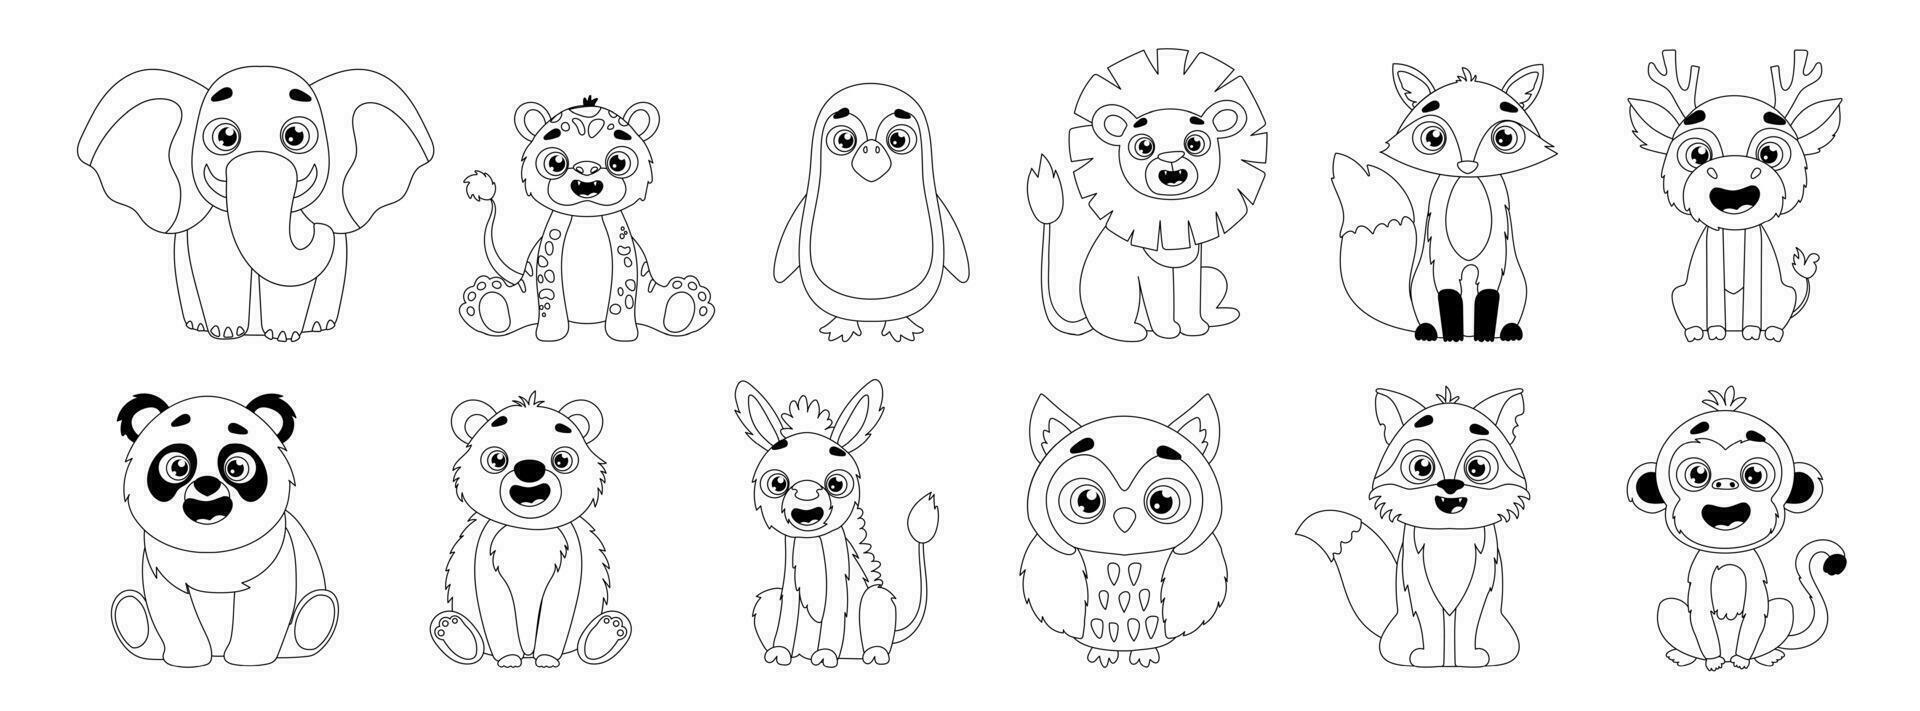 Set of cute wild animal icons including lion, fox, deer, elephant, tiger, penguin, owl, wolf, monkey, panda, bear and donkey. Vector black and white linear style illustration of forest animals.